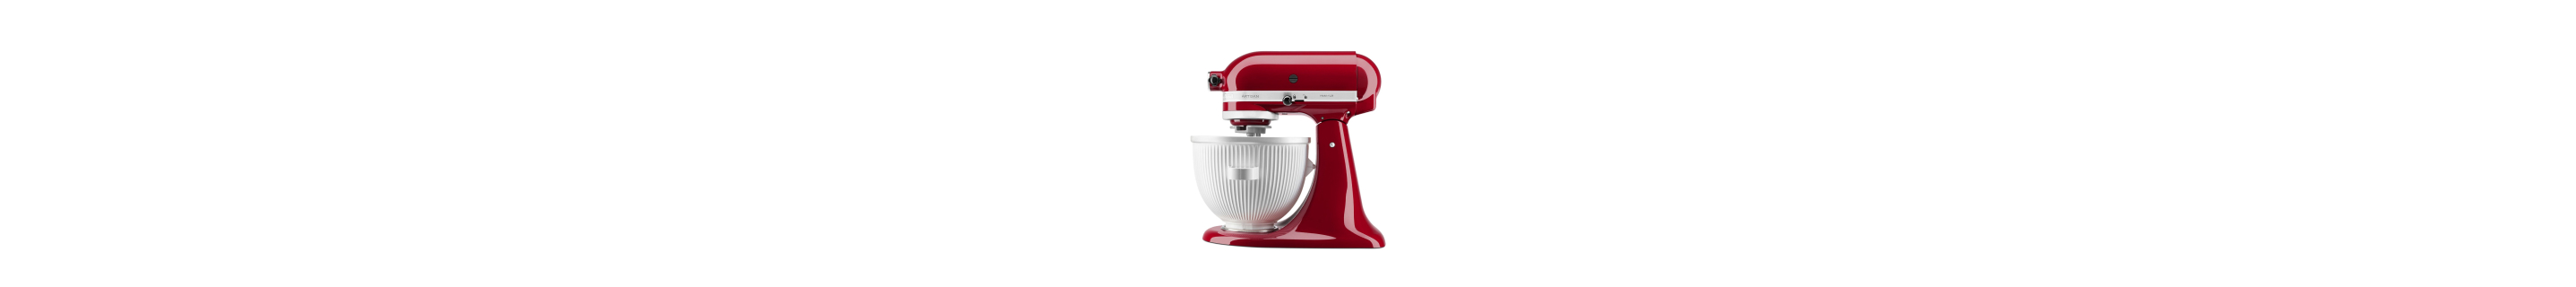 How to Make a Cake With a KitchenAid® Stand Mixer